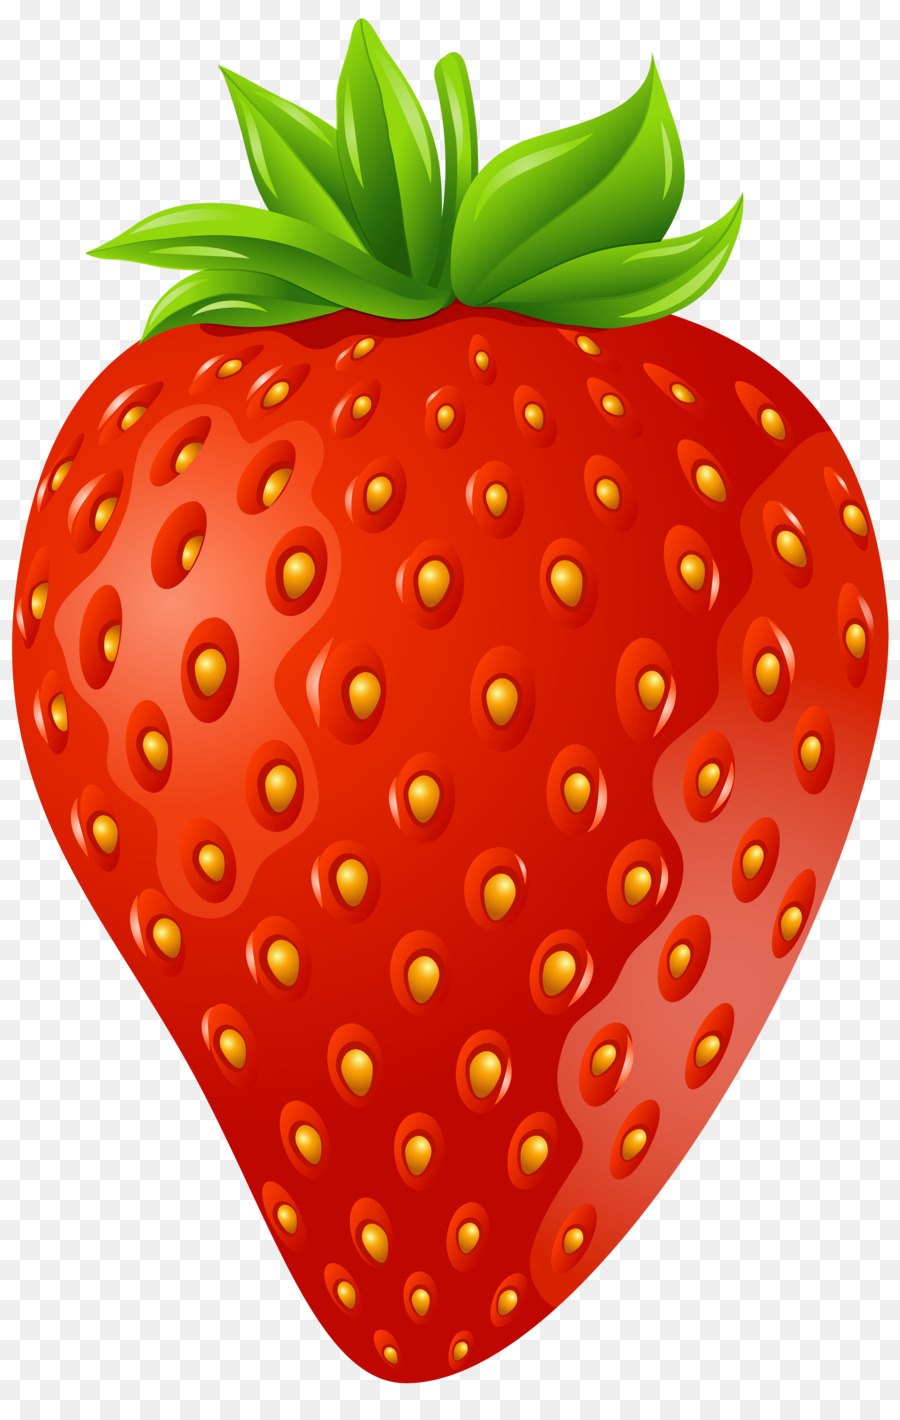 Strawberry pie Clip art - strawberry png download - 3210*5000 - Free Transparent Strawberry Pie png Download.